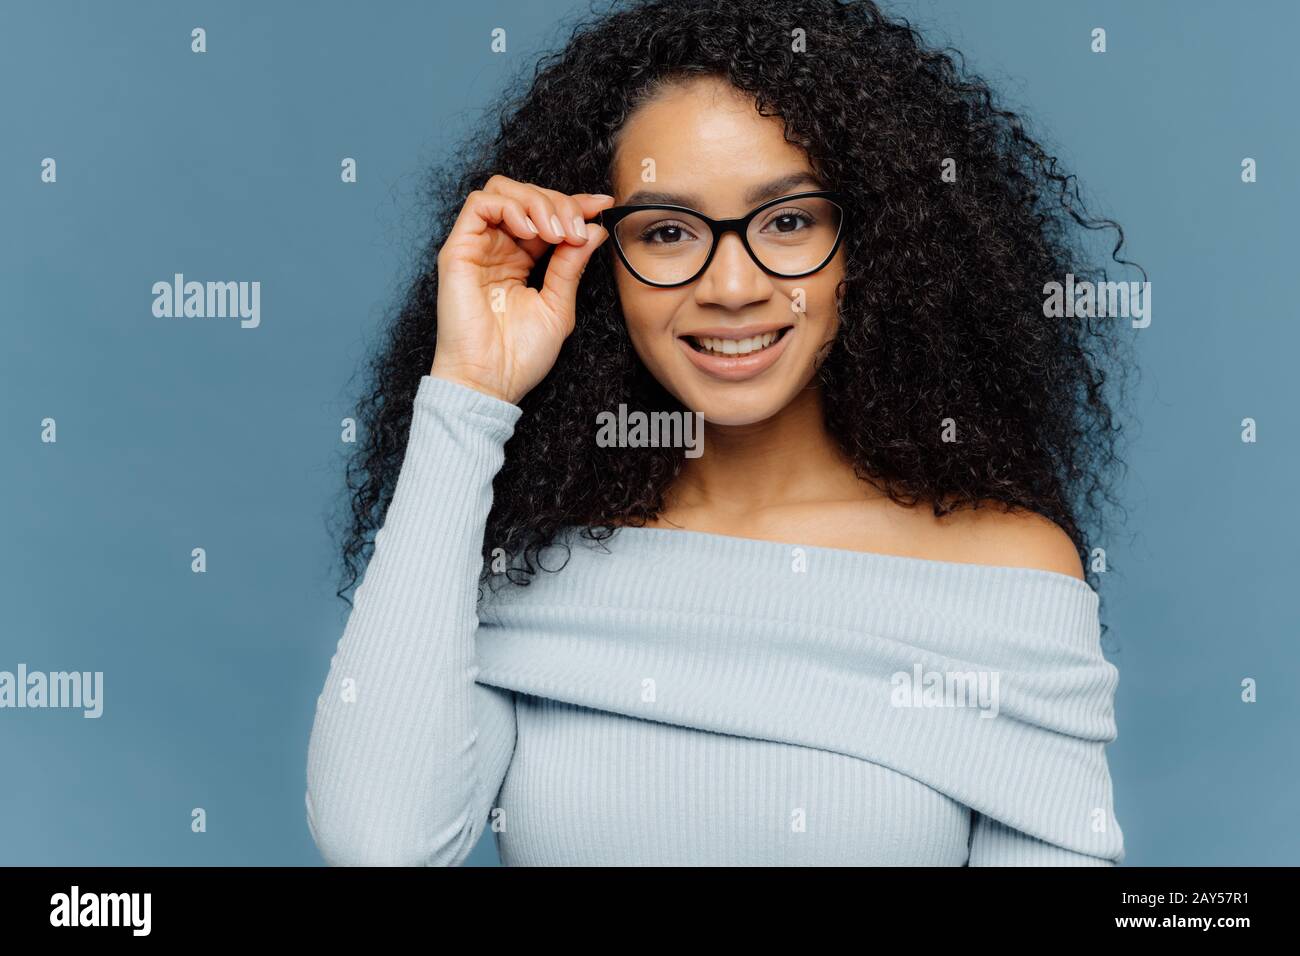 Headshot of pleasant looking young African American woman keeps hand on frame of glasses, has gentle smile, wears blue jumper, has minimal makeup, hea Stock Photo